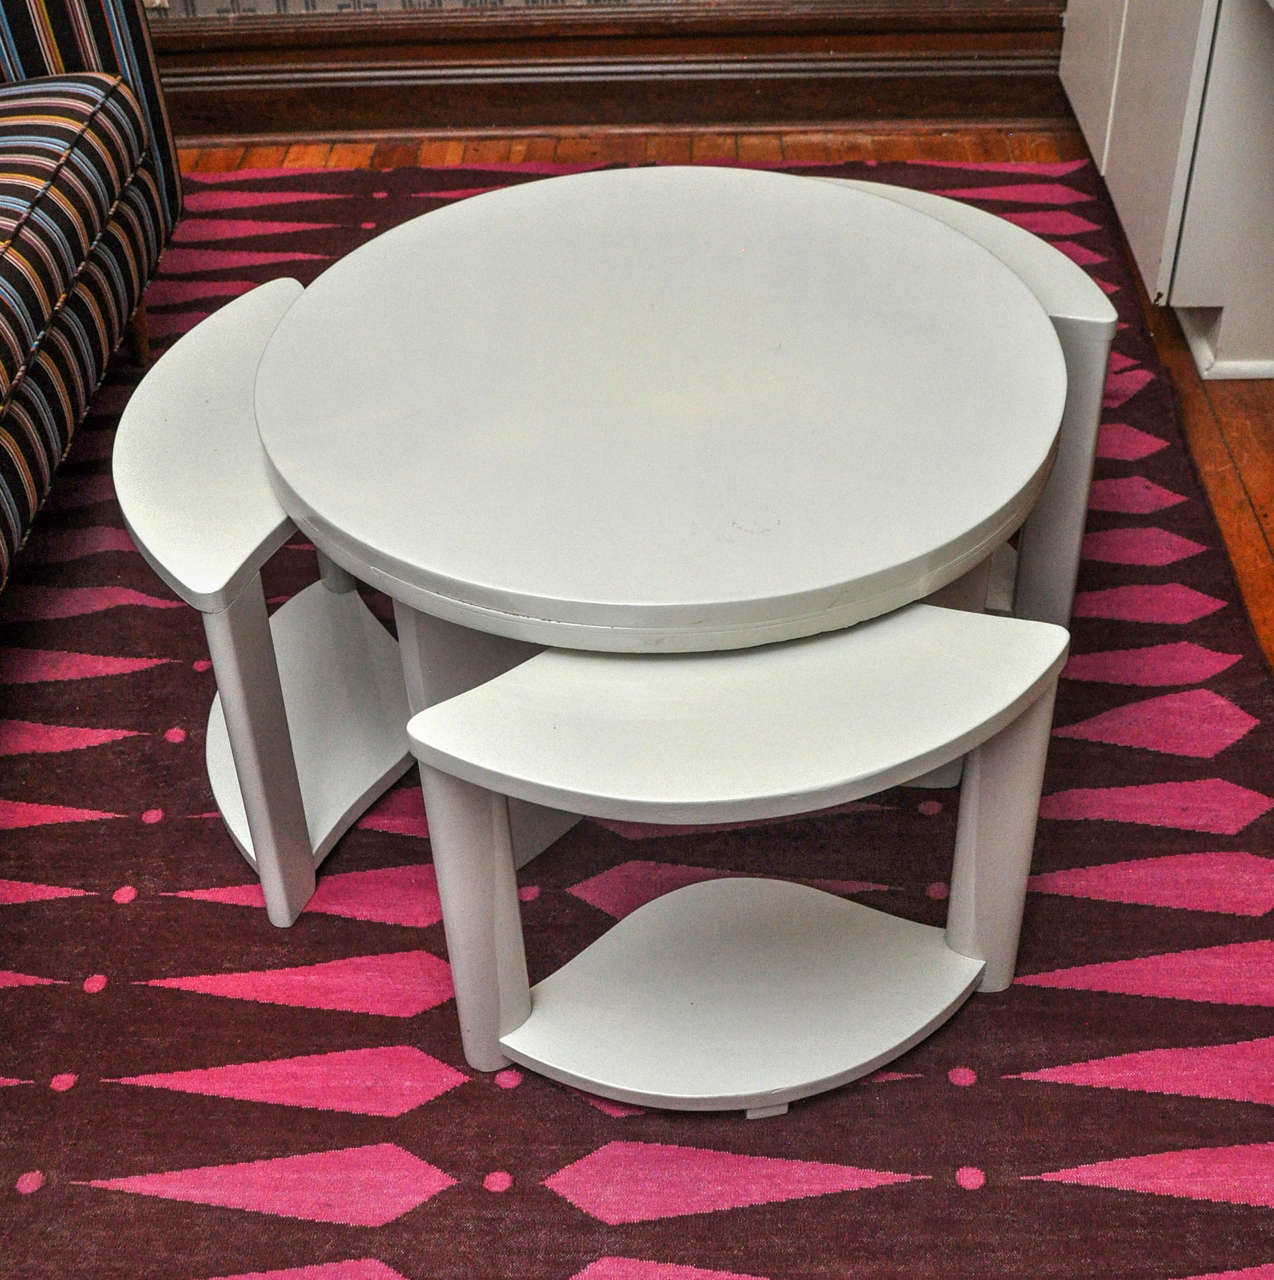 20th Century Asian Lacquered Coffee Table with Three Stools